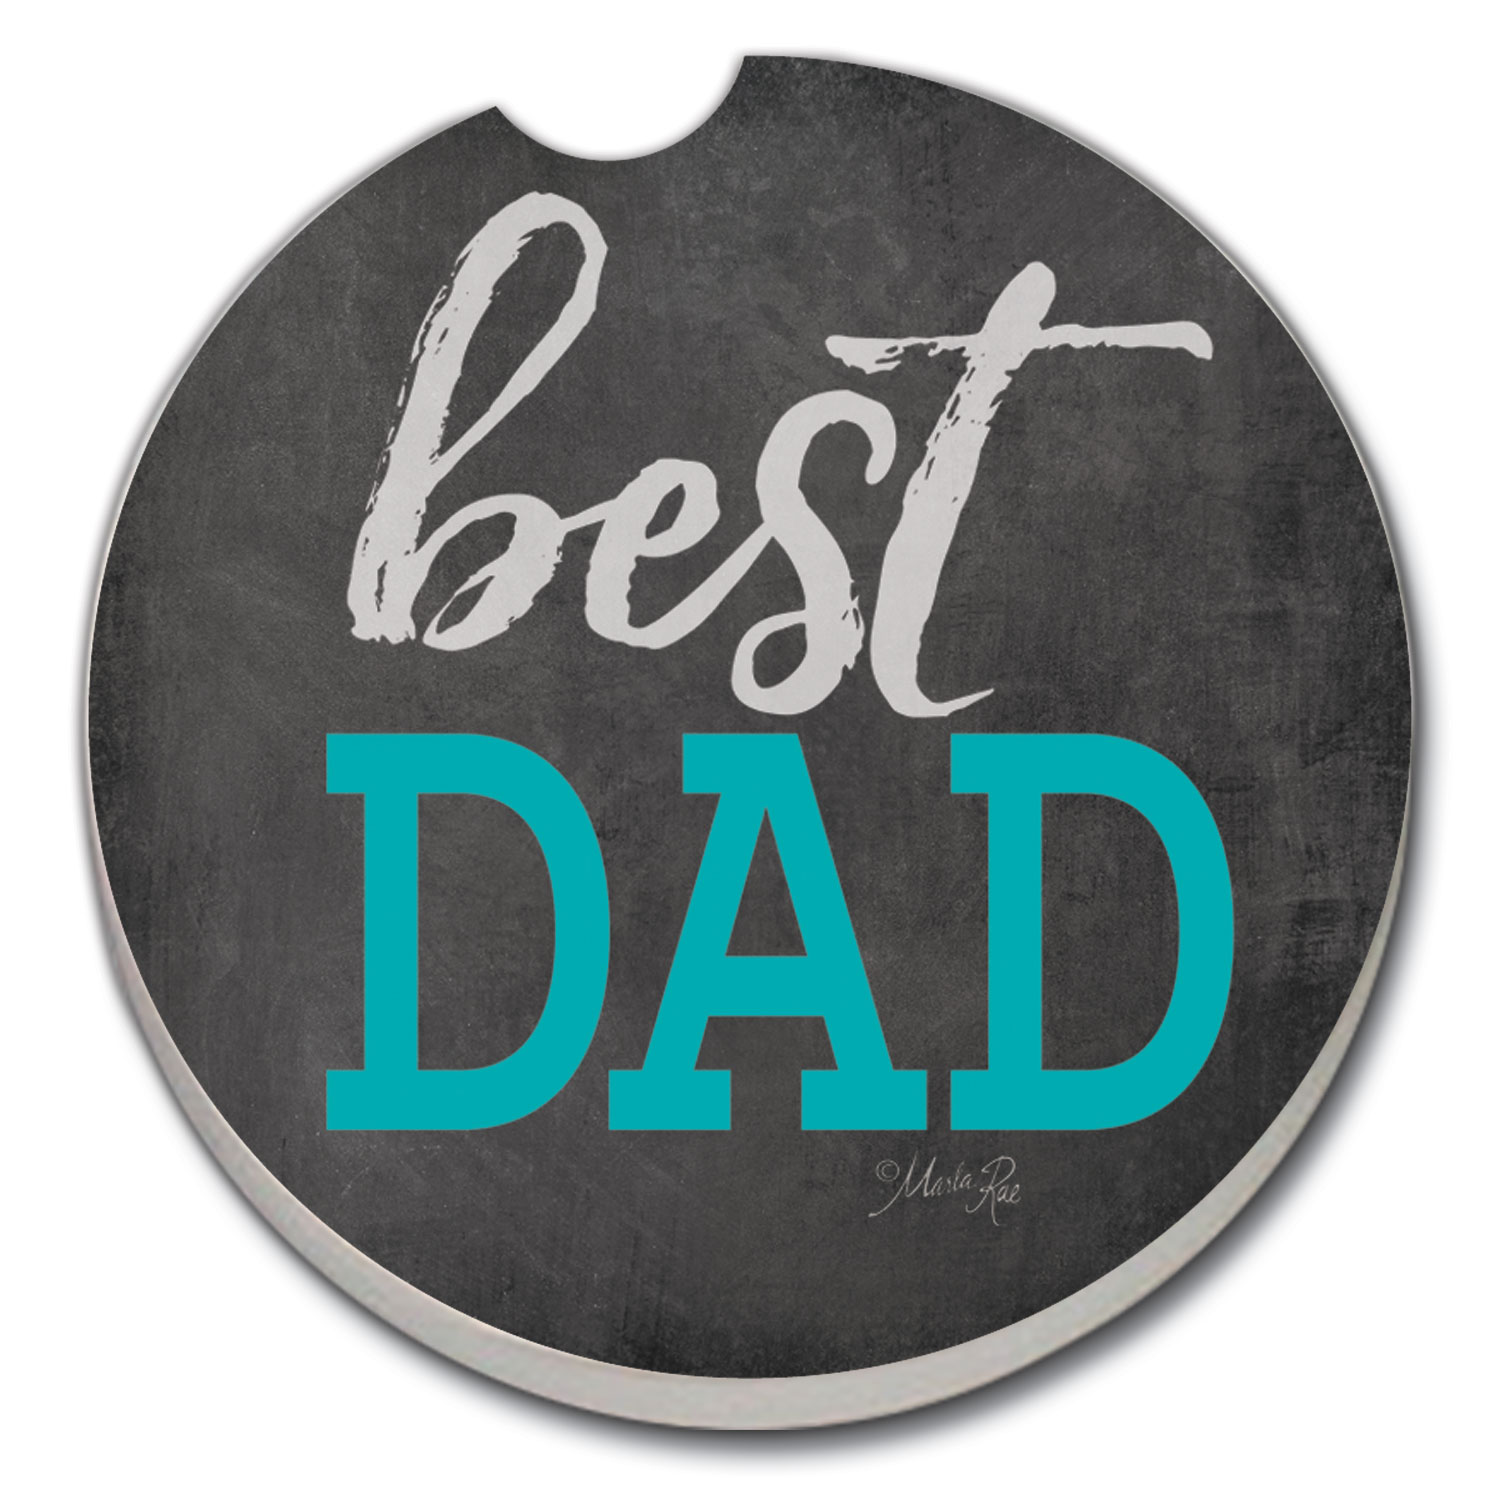 08709: BEST DAD ABSORBENT STONE CAR COASTER - COUNTER ART